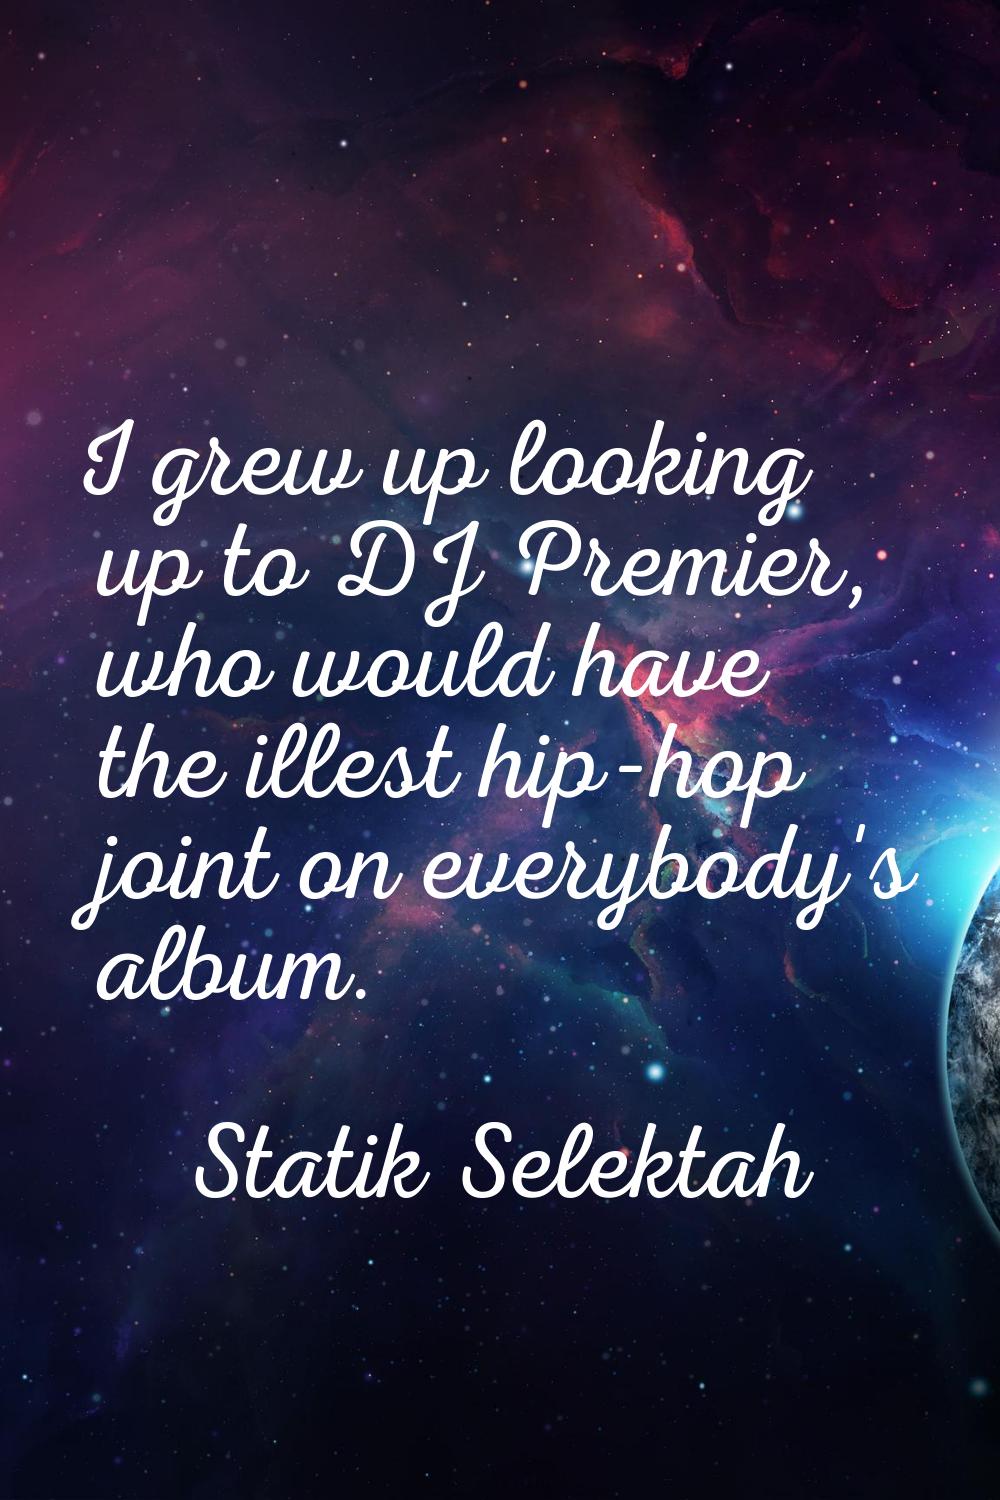 I grew up looking up to DJ Premier, who would have the illest hip-hop joint on everybody's album.